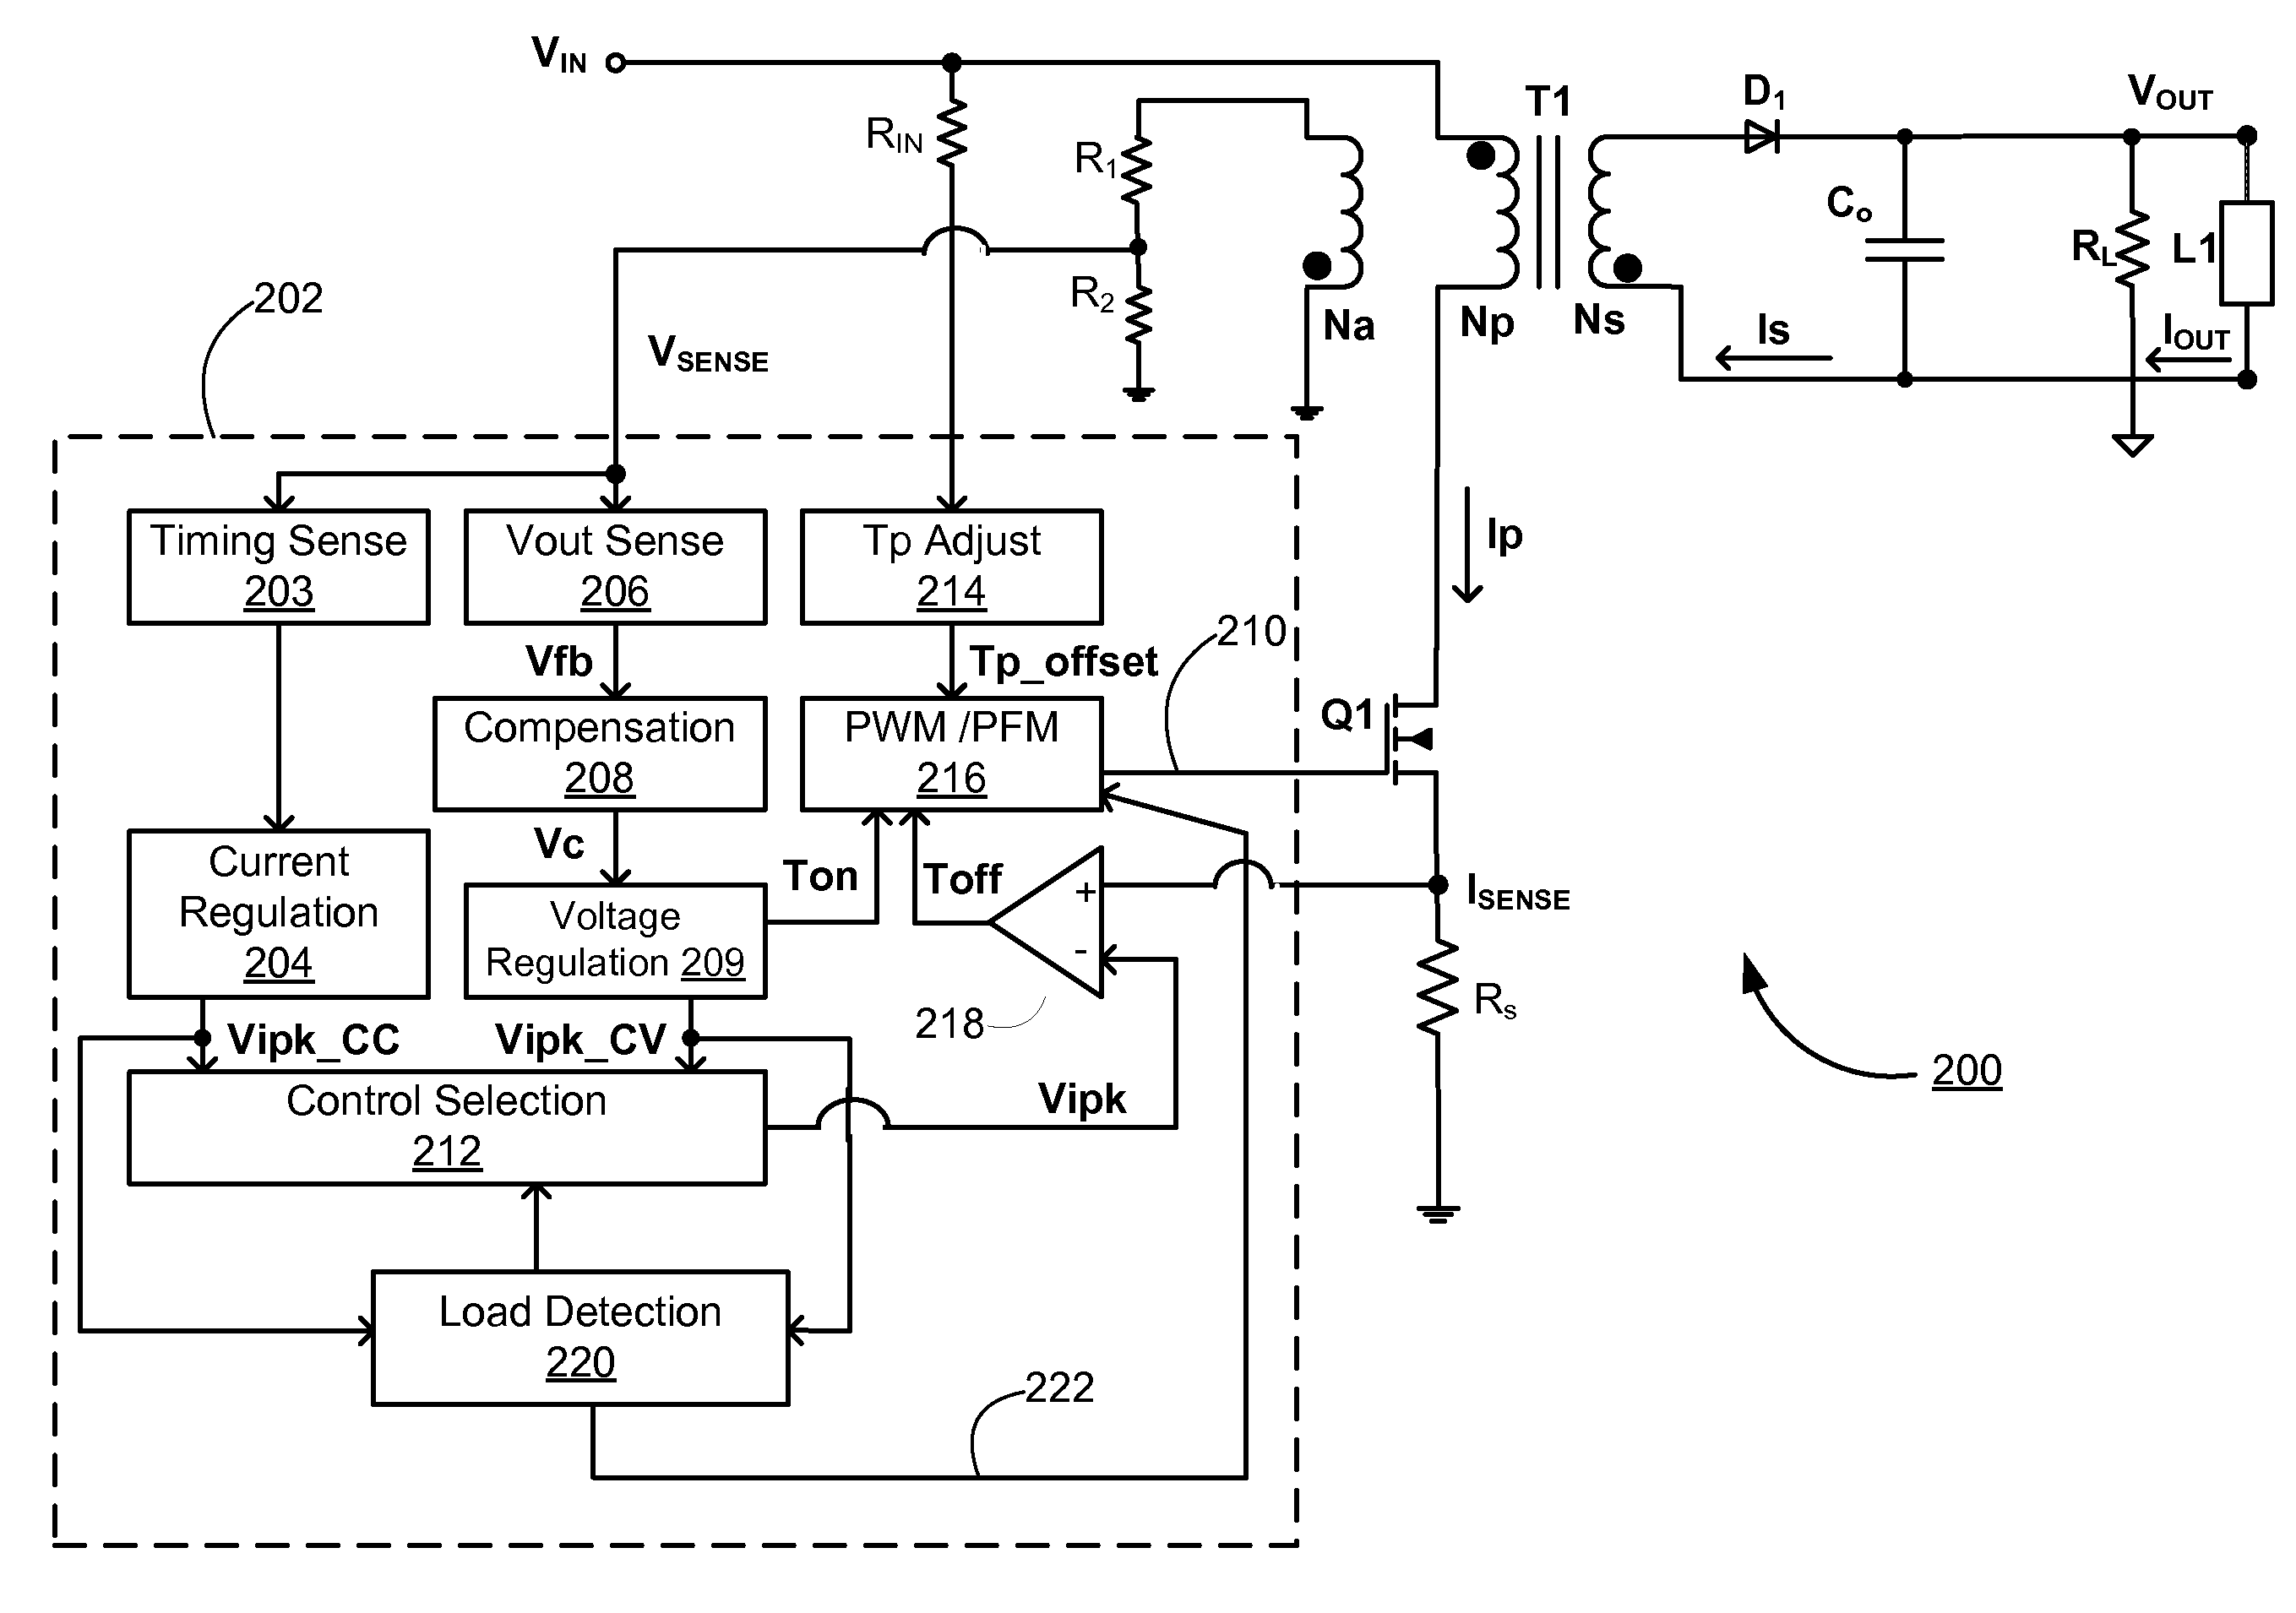 Detecting light load conditions and improving light load efficiency in a switching power converter